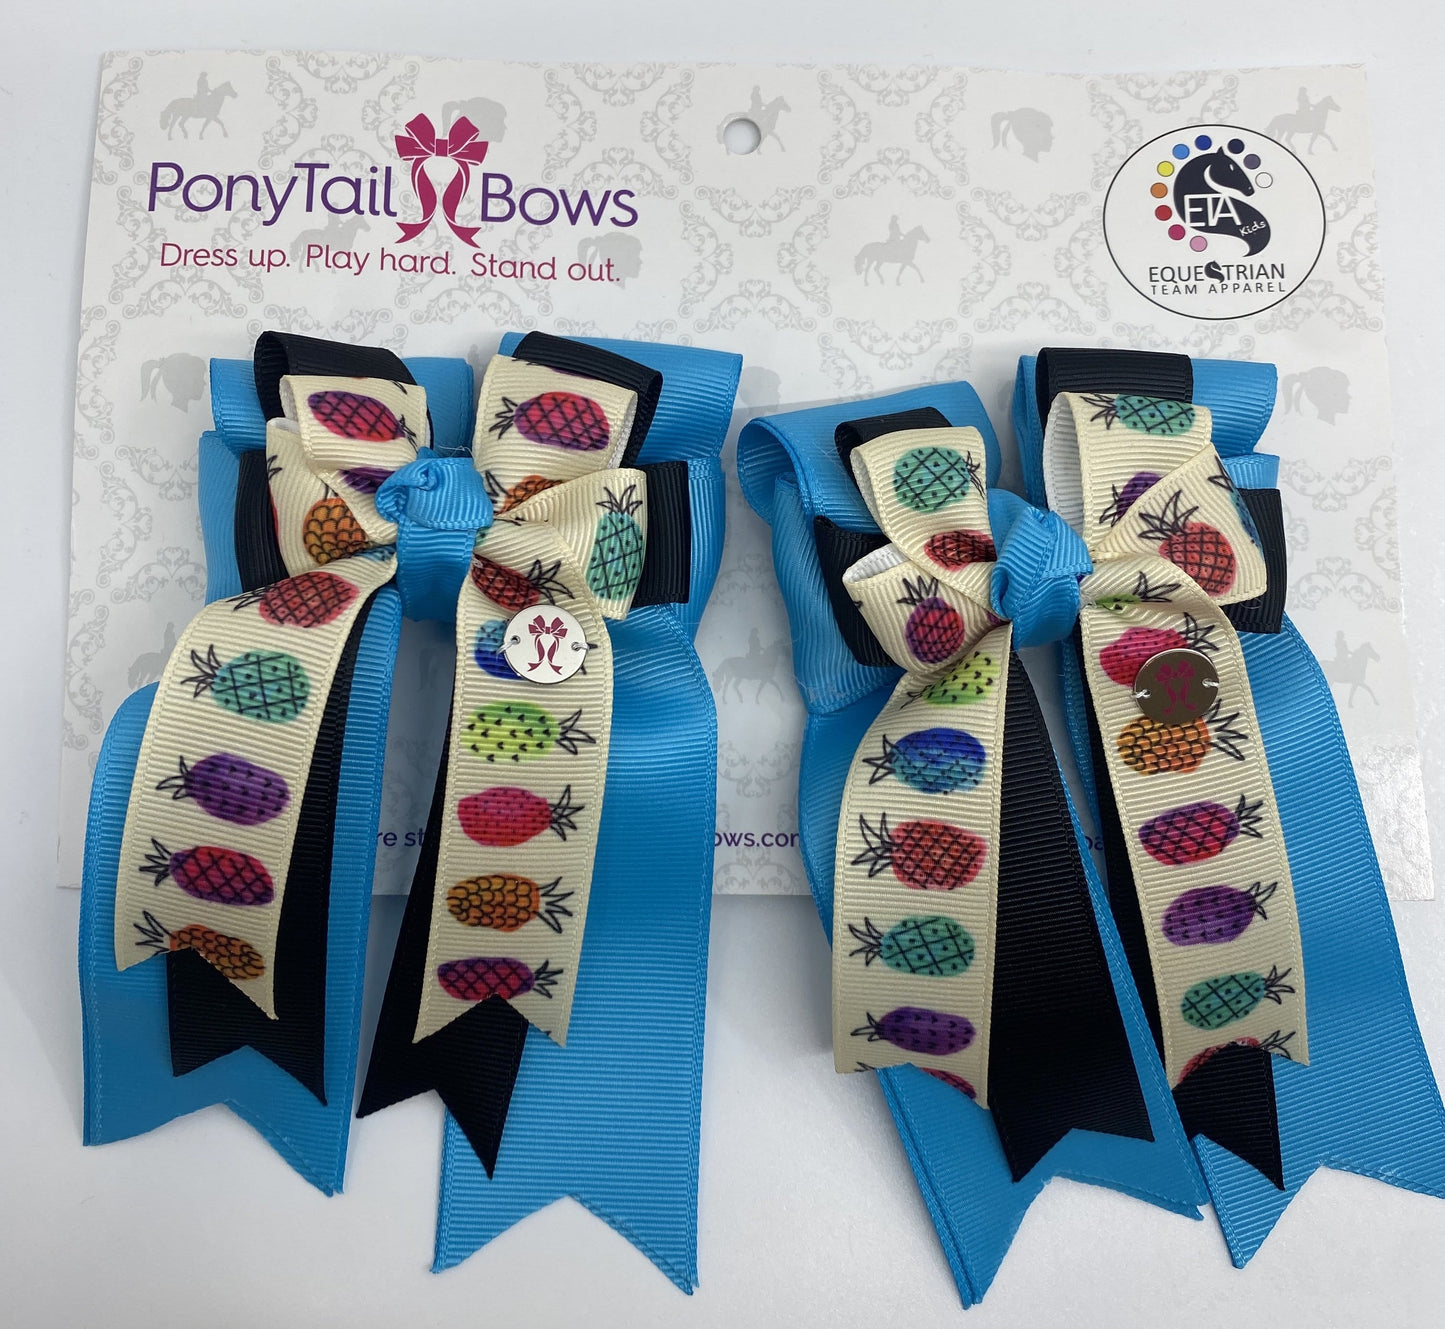 PonyTail Bows 3" Tails Pineapple Turquoise PonyTail Bows equestrian team apparel online tack store mobile tack store custom farm apparel custom show stable clothing equestrian lifestyle horse show clothing riding clothes PonyTail Bows | Equestrian Hair Accessories horses equestrian tack store